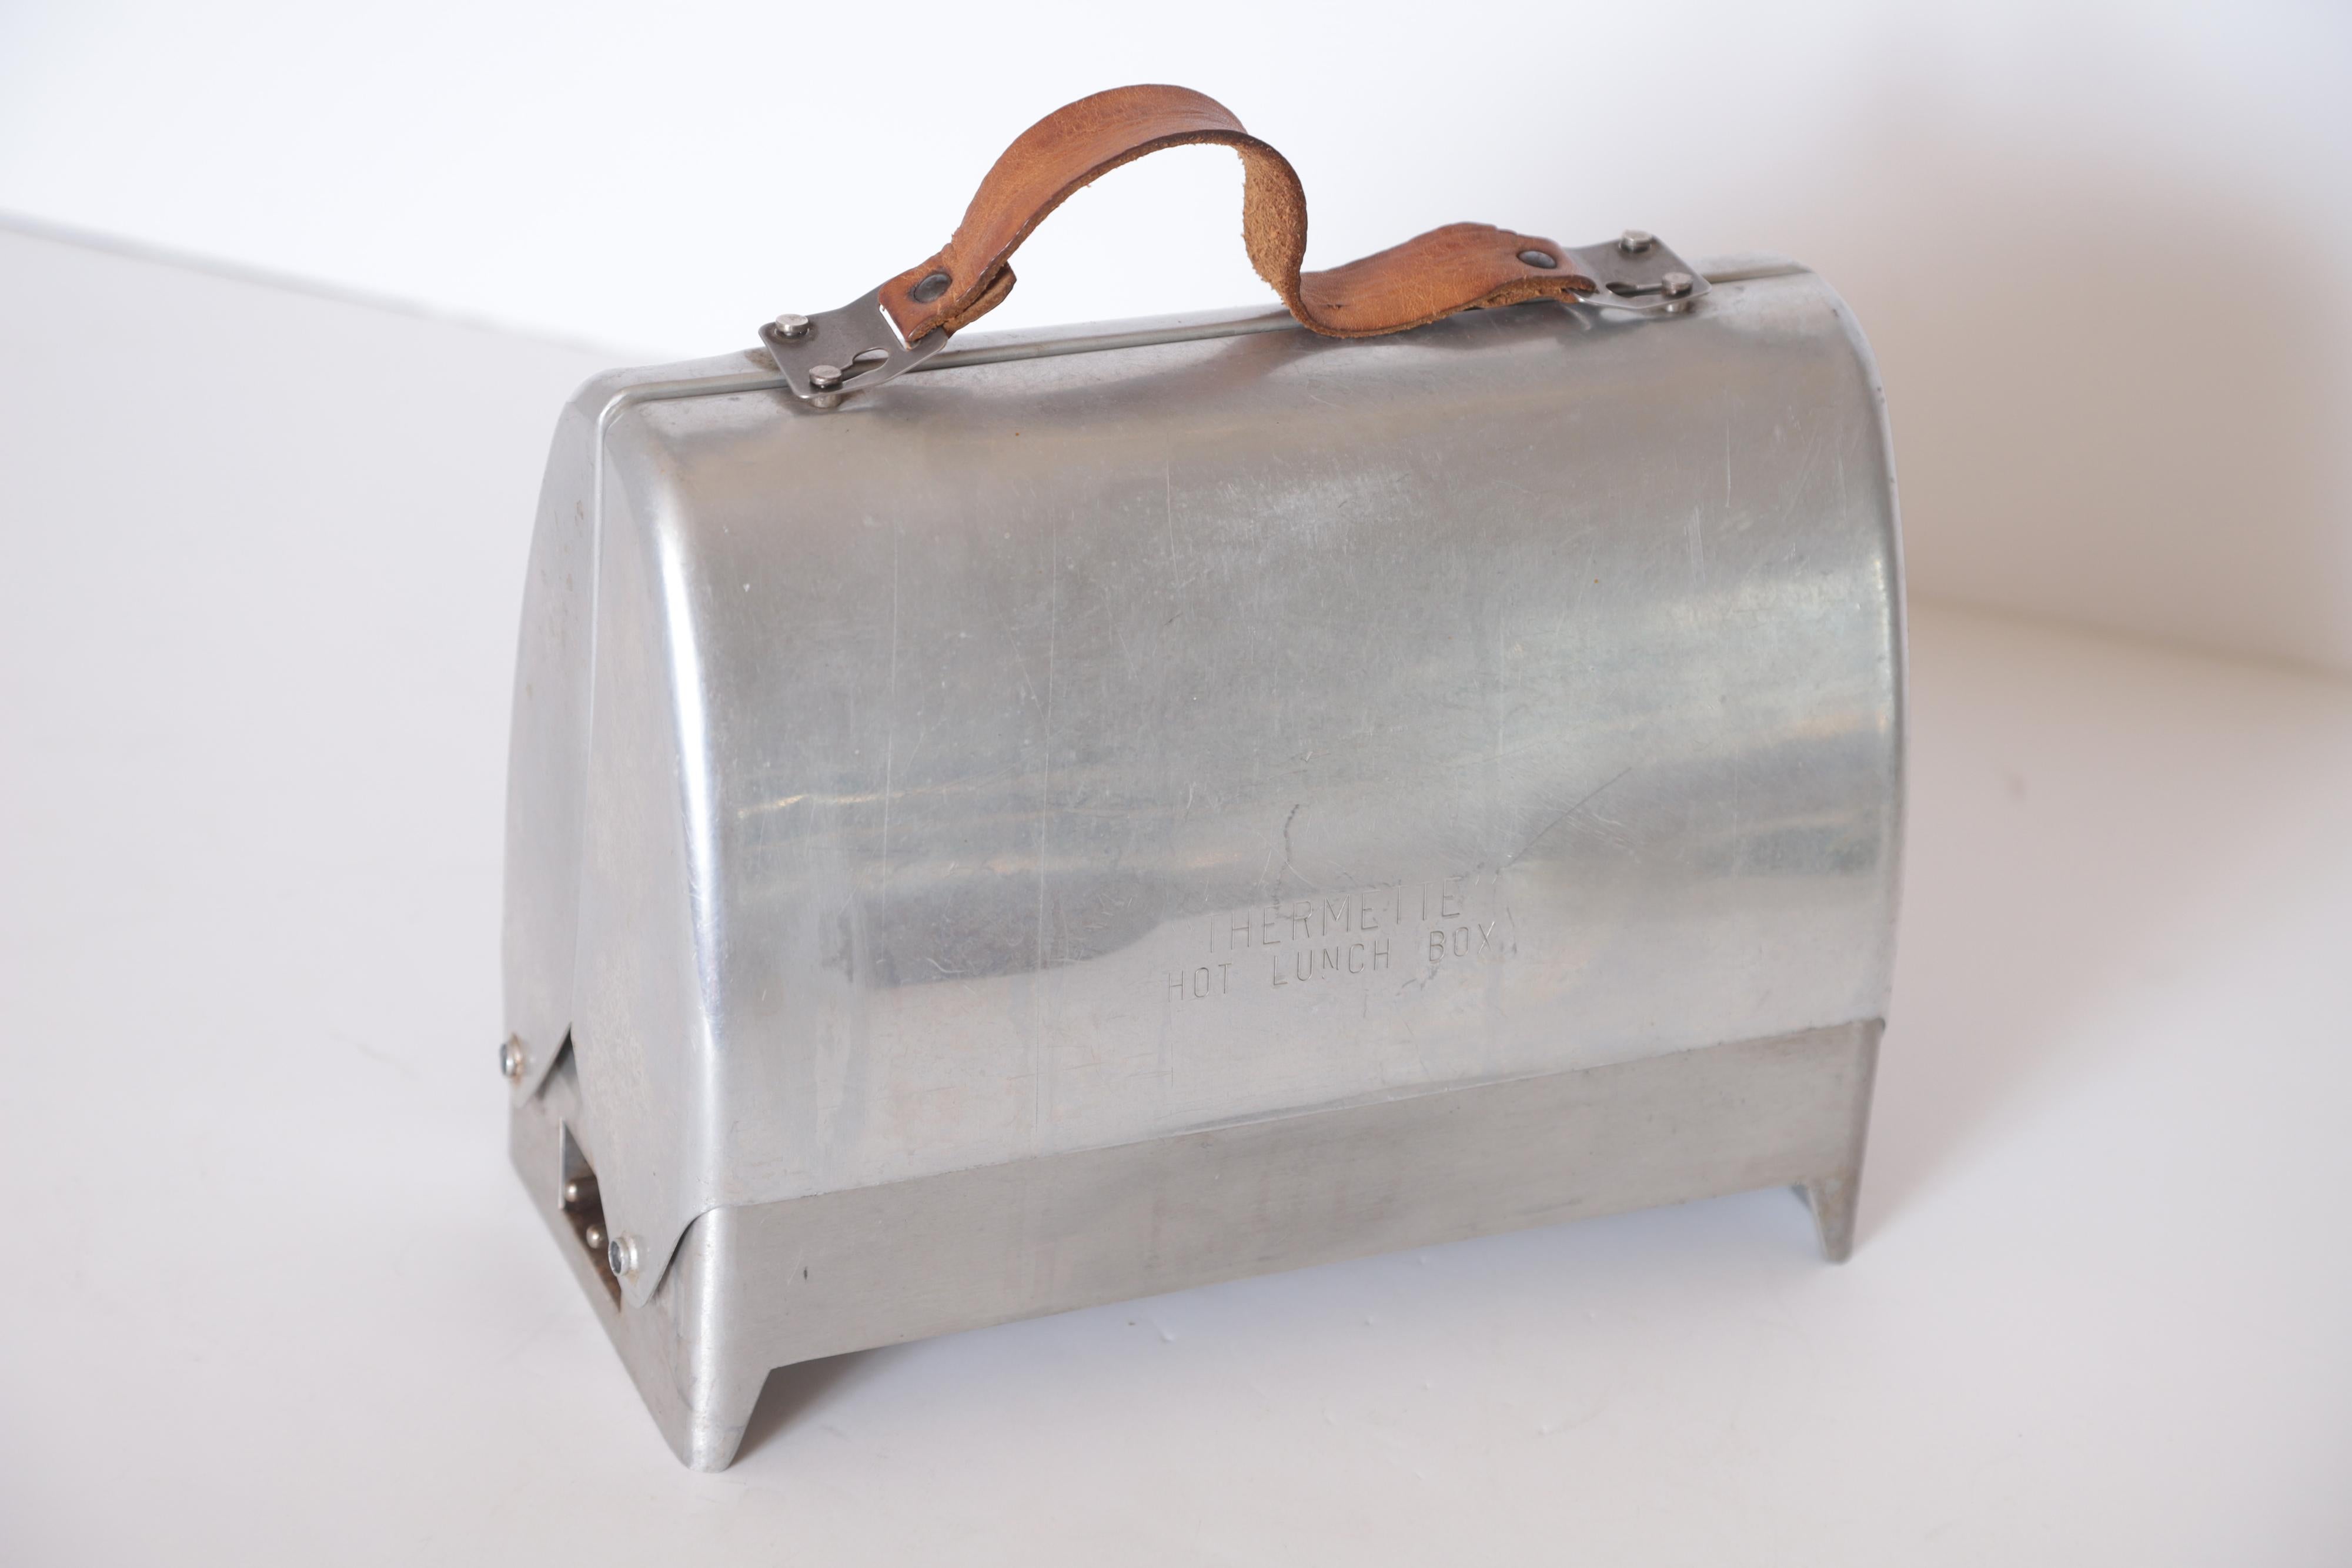 Art Deco Machine Age Industrial Design Thermette Hot Lunch Box by Privett Mfg. Co. Circa 1943  Lunch Pail Lunchpail Lunchbox
American Industrial Design

Thermette hot lunch box from the 1940s.  Polished aluminum.
Leather strap on top for carrying